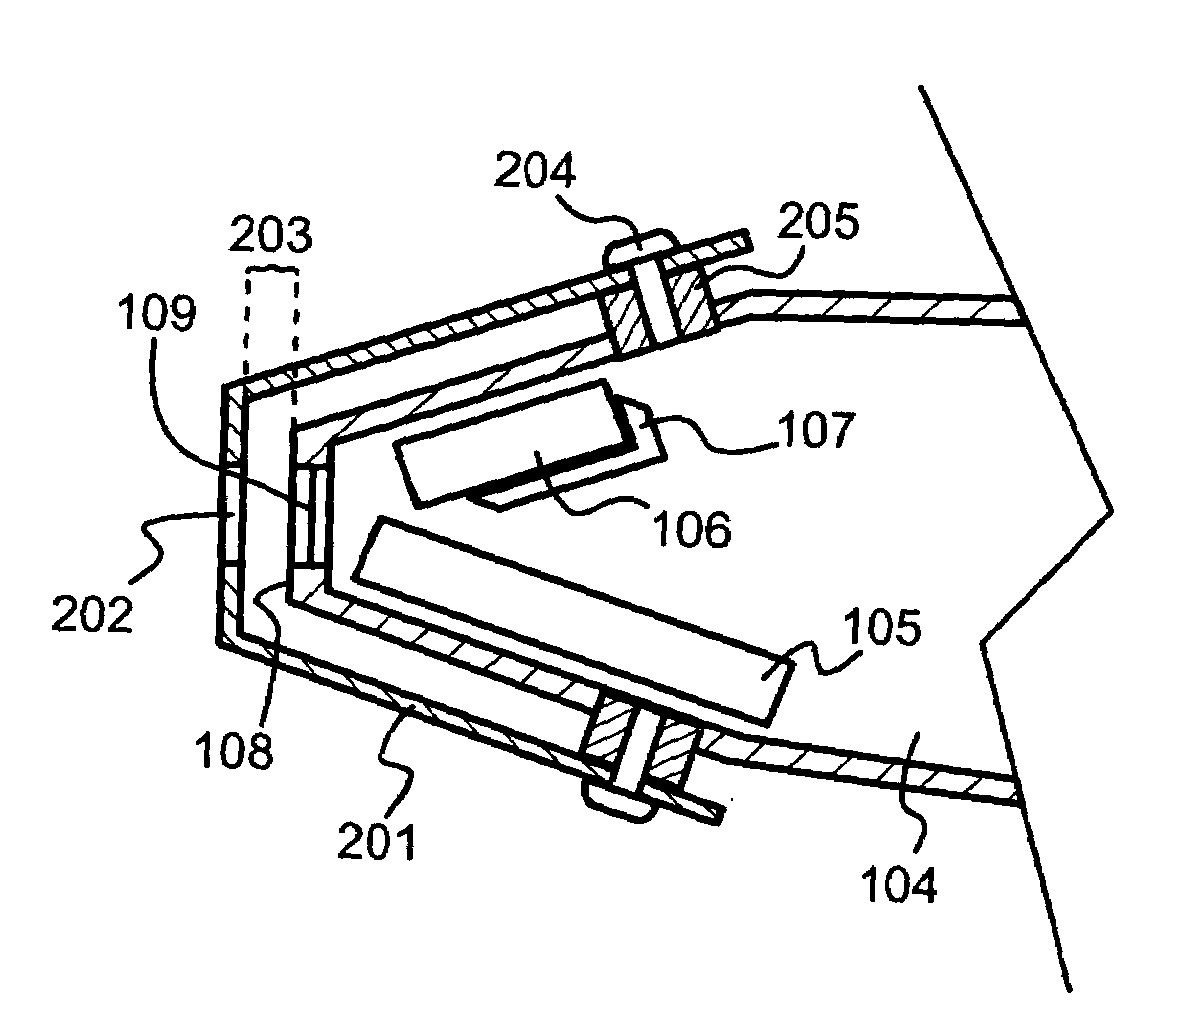 Adapter and analyzer device for performing X-ray fluorescence analysis on hot surfaces